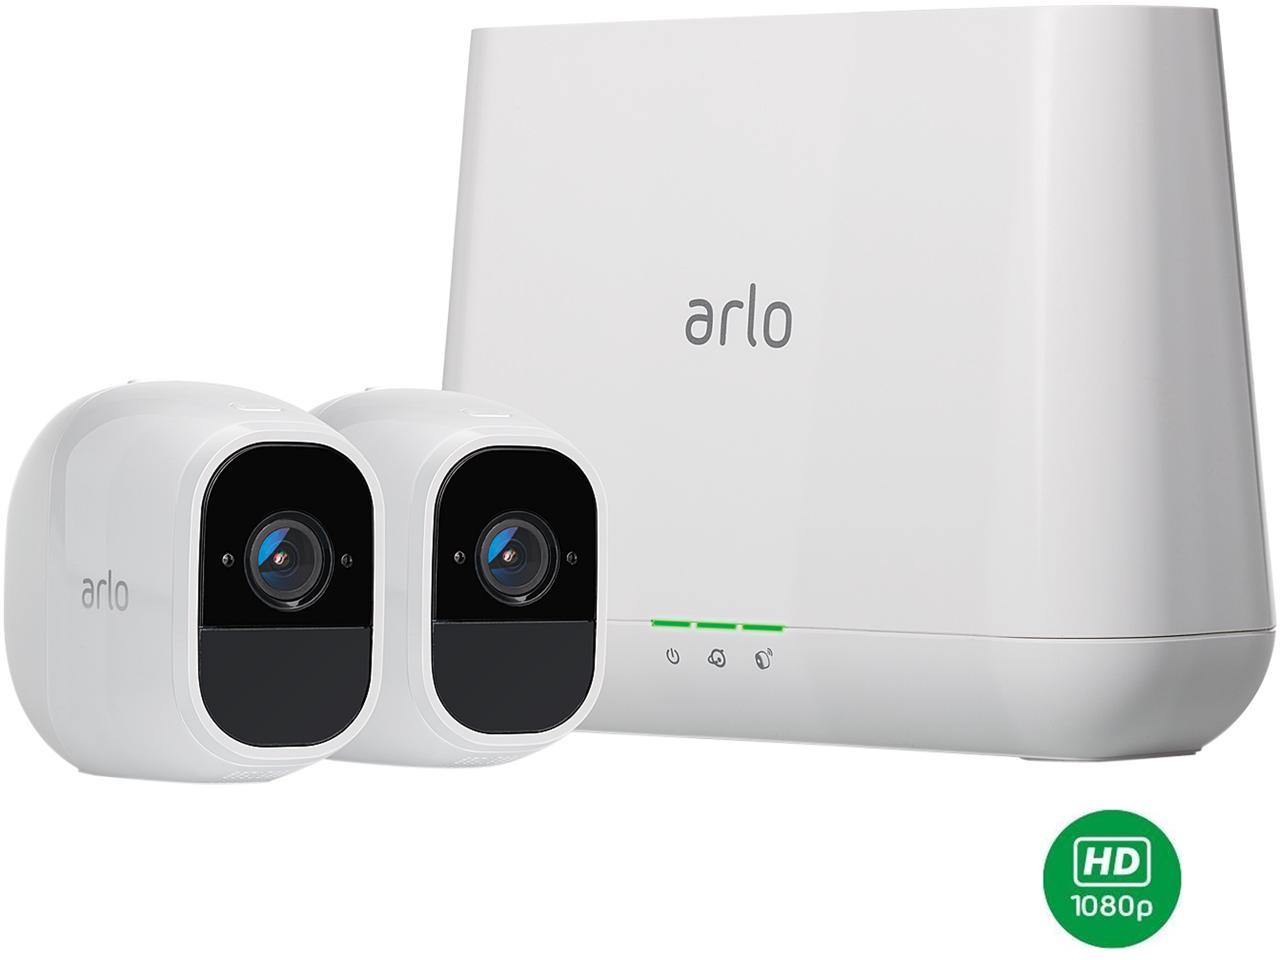 Arlo Pro 2 Security Camera System 2 Rechargeable Battery Powered WireFree HD 1080p Night